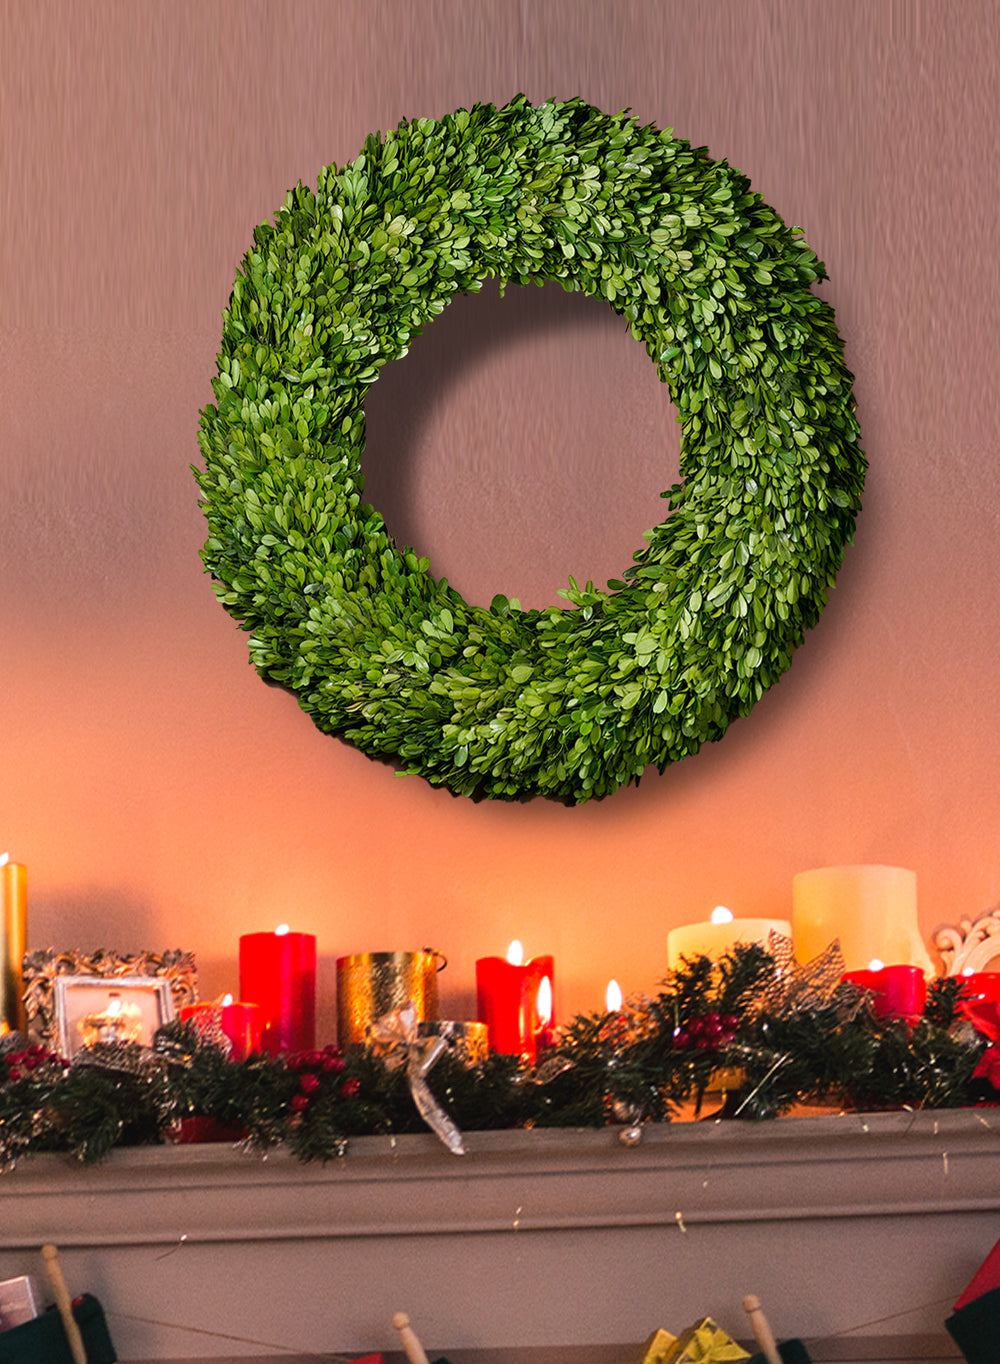 LaHomey 10-Inch Boxwood Wreath, Green Garland for Home Wedding Decoration